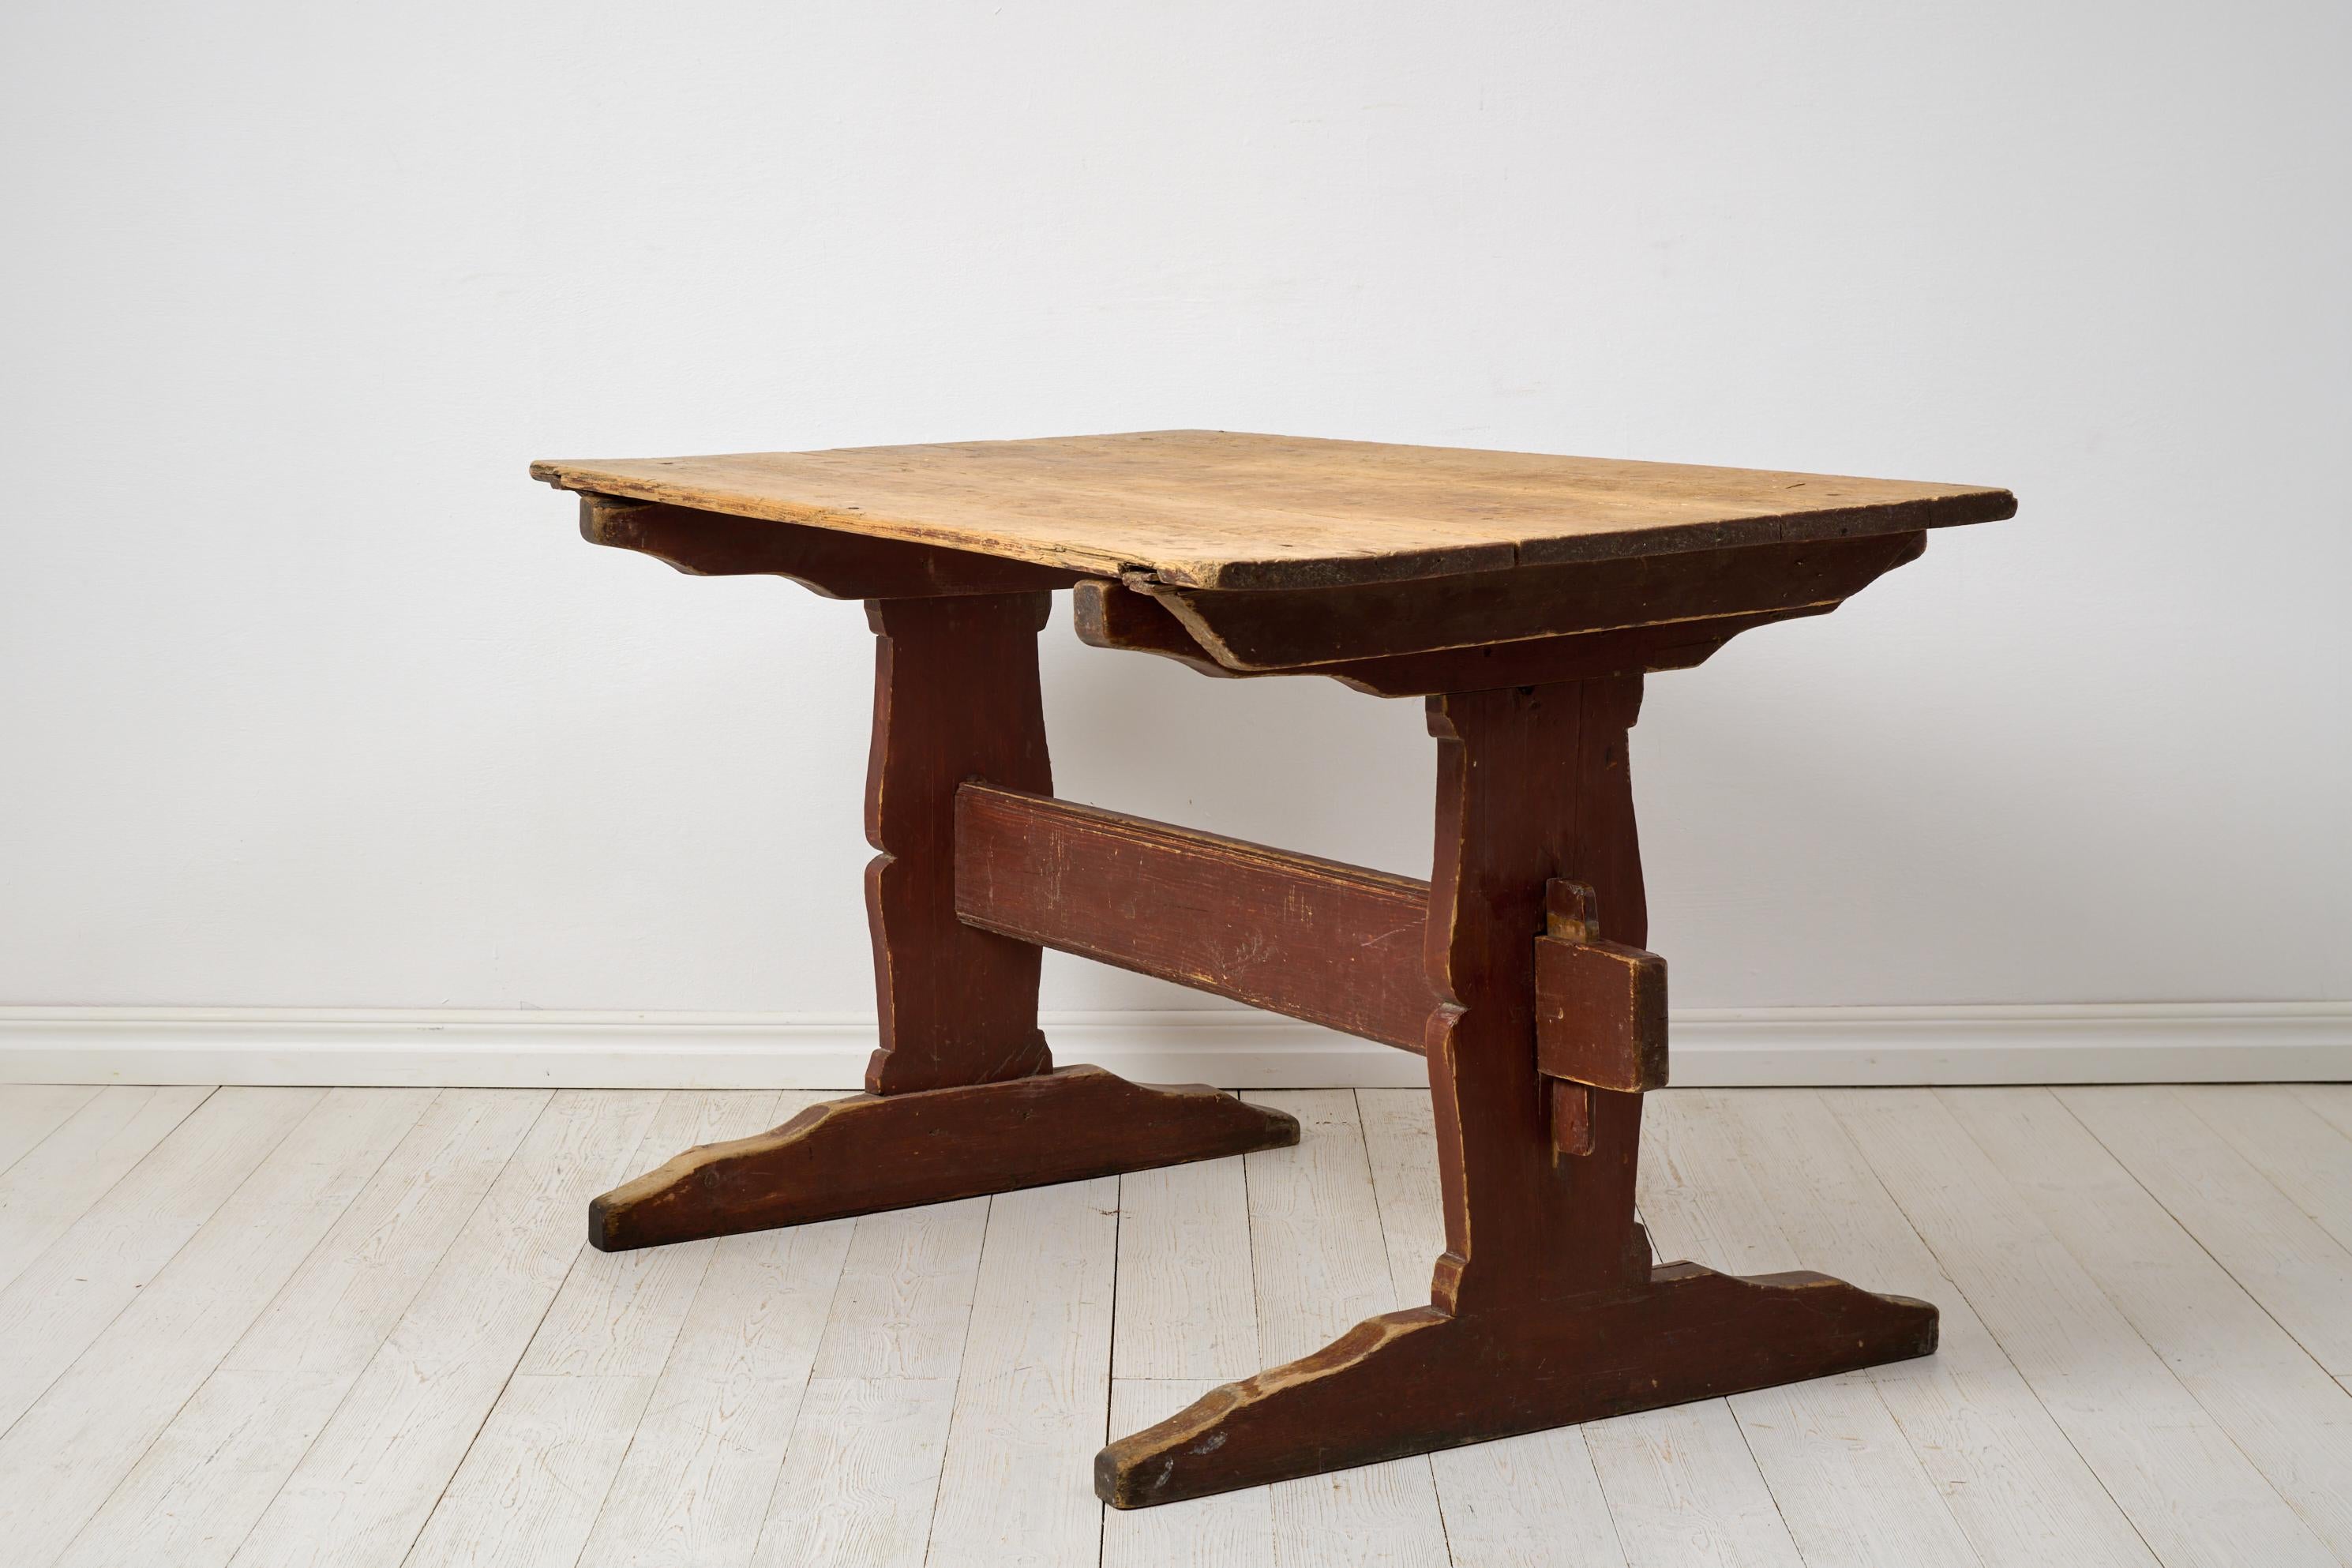 Hand-Crafted Genuine Antique Northern Swedish Pine Rustic Country Small Dining or Work Table  For Sale